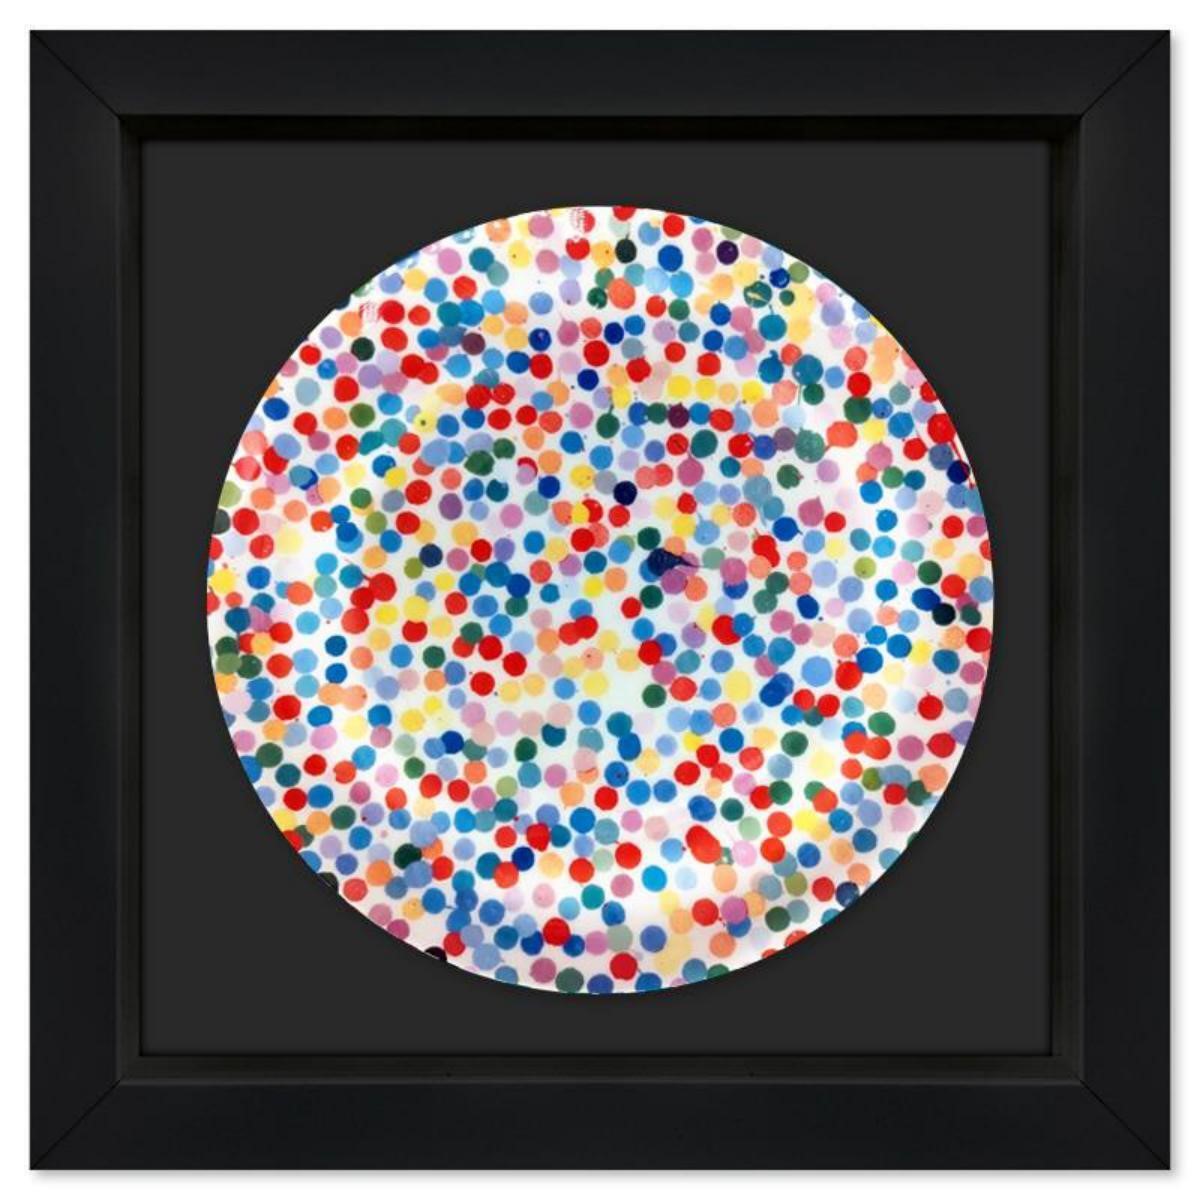 Damien Hirst, "The Currency" Framed Plate with Let